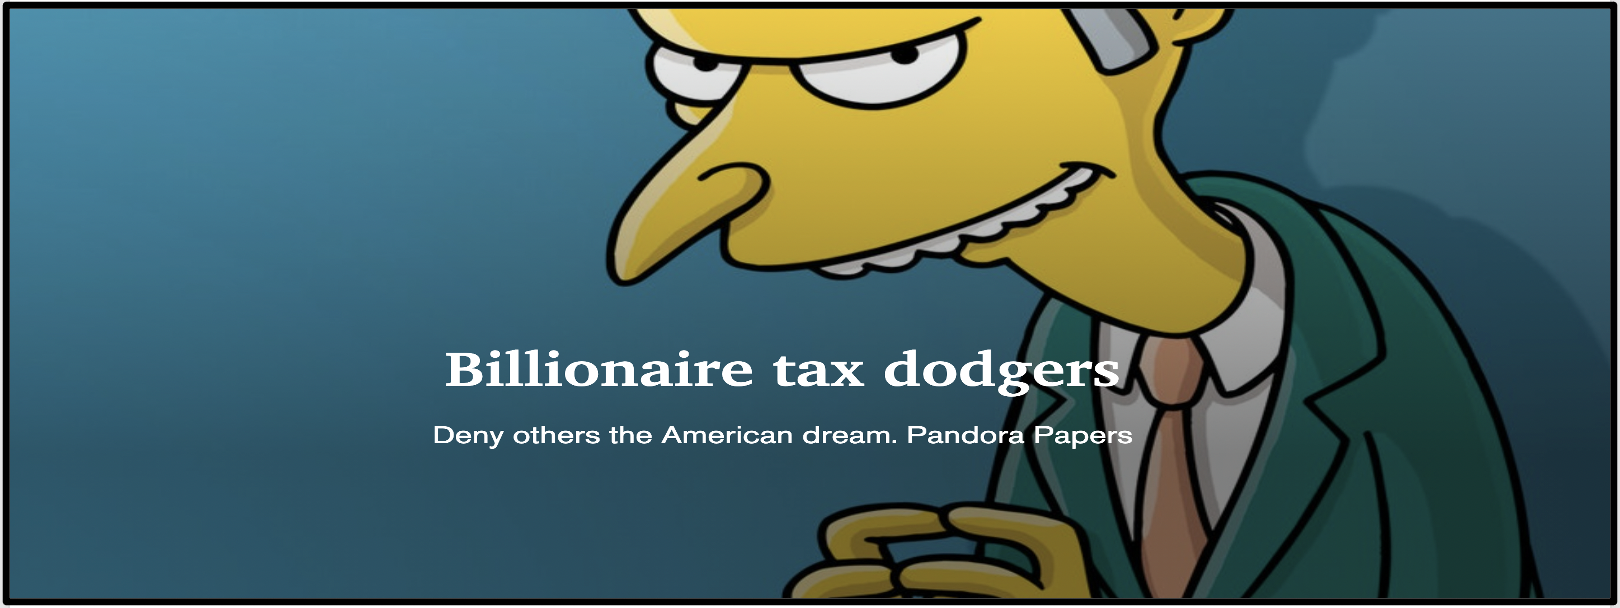 Billionaire tax dodgers fund politicians to cut their taxes and deny others the American dream.